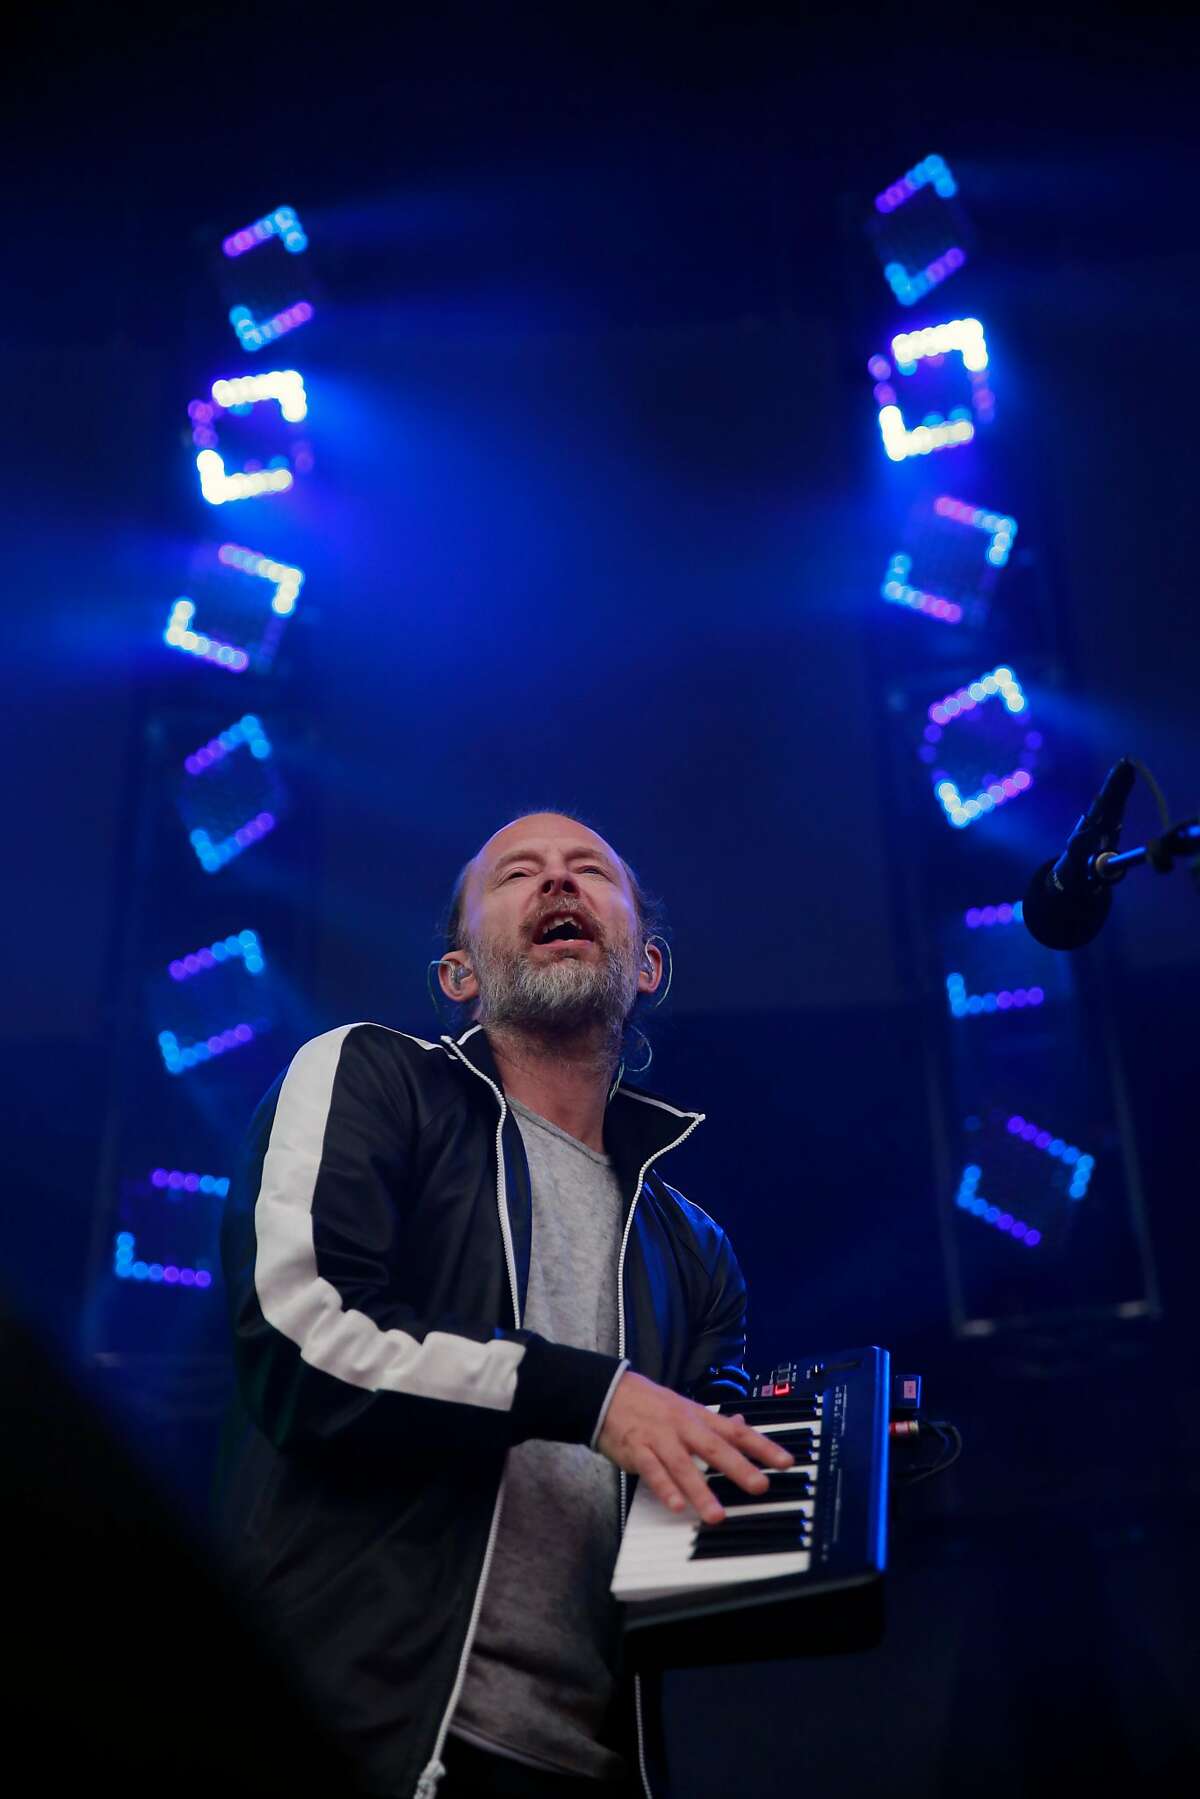 Thom Yorke of Radiohead as they play the Lands End stage during day two of the Outside Lands Music Festival in Golden Gate Park in San Francisco, California, on Sat. Aug. 6, 2016.